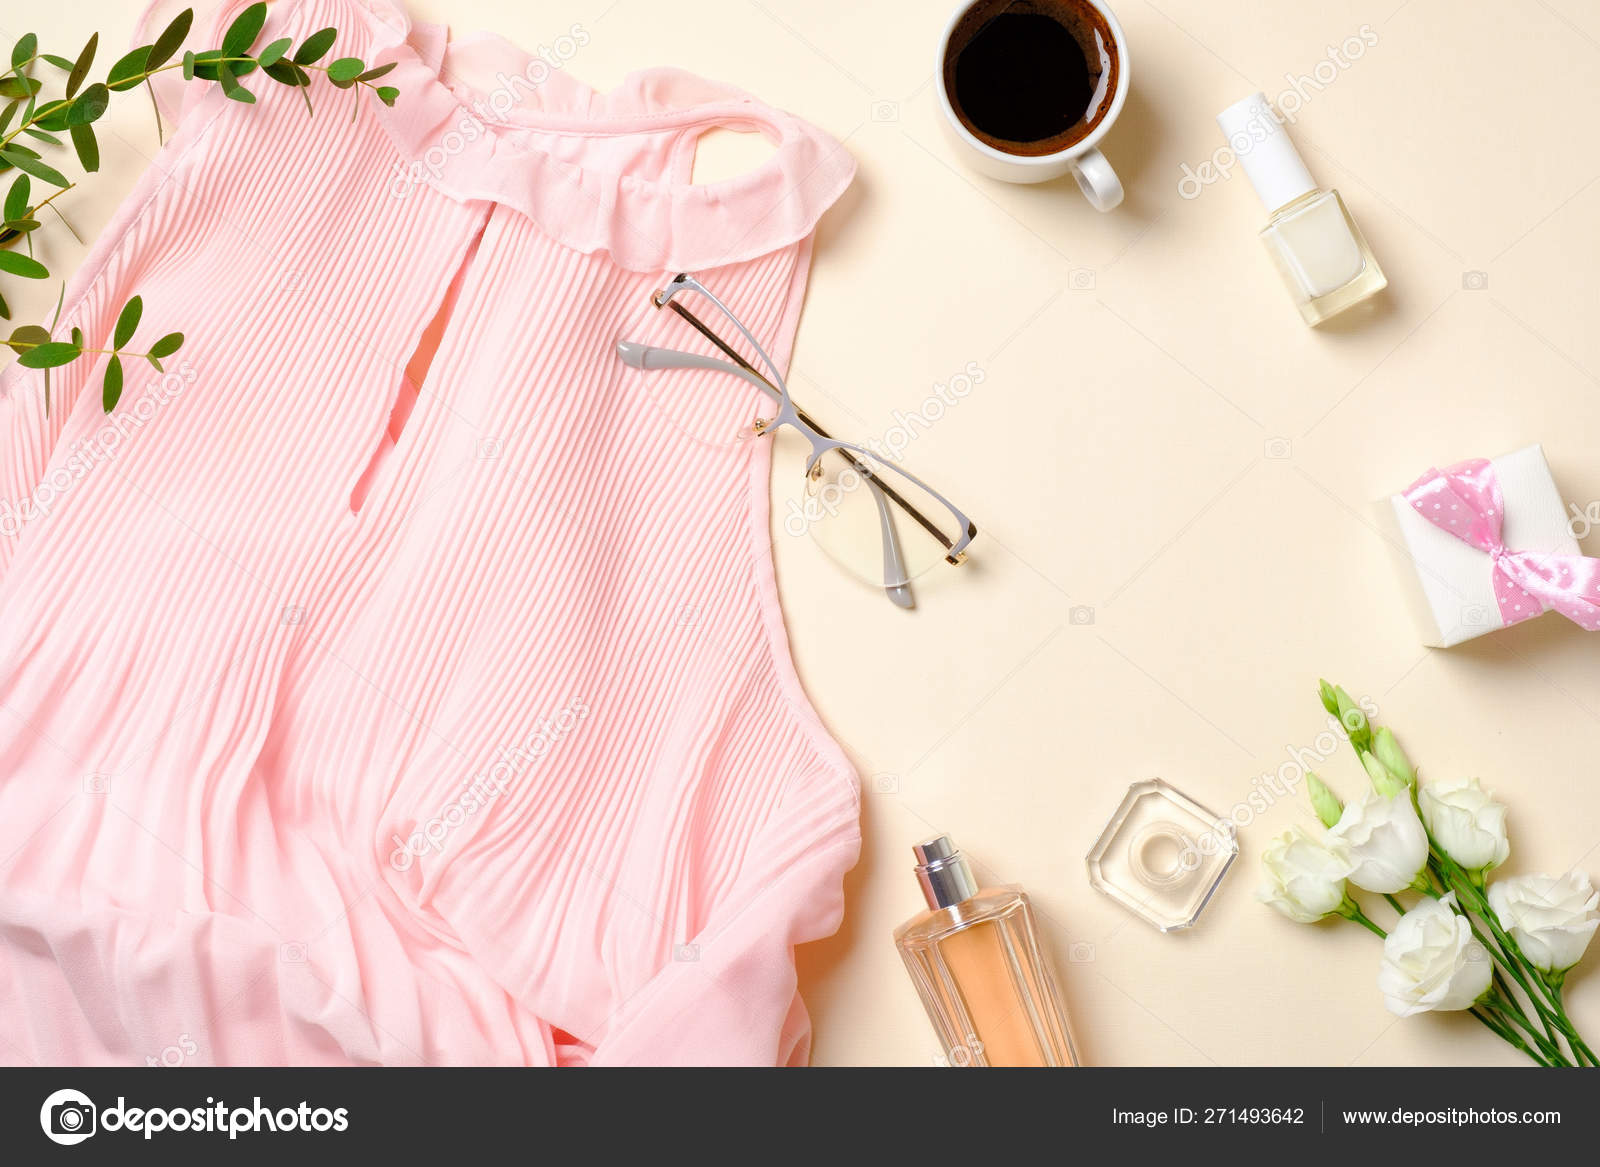 Flat lay feminine accessories, perfume bottle, roses flowers, dress, glasses, coffee cup, gift box. Top view beauty blogger with female clothes and cosmetic. Fashion blog banner. Stock Photo ©